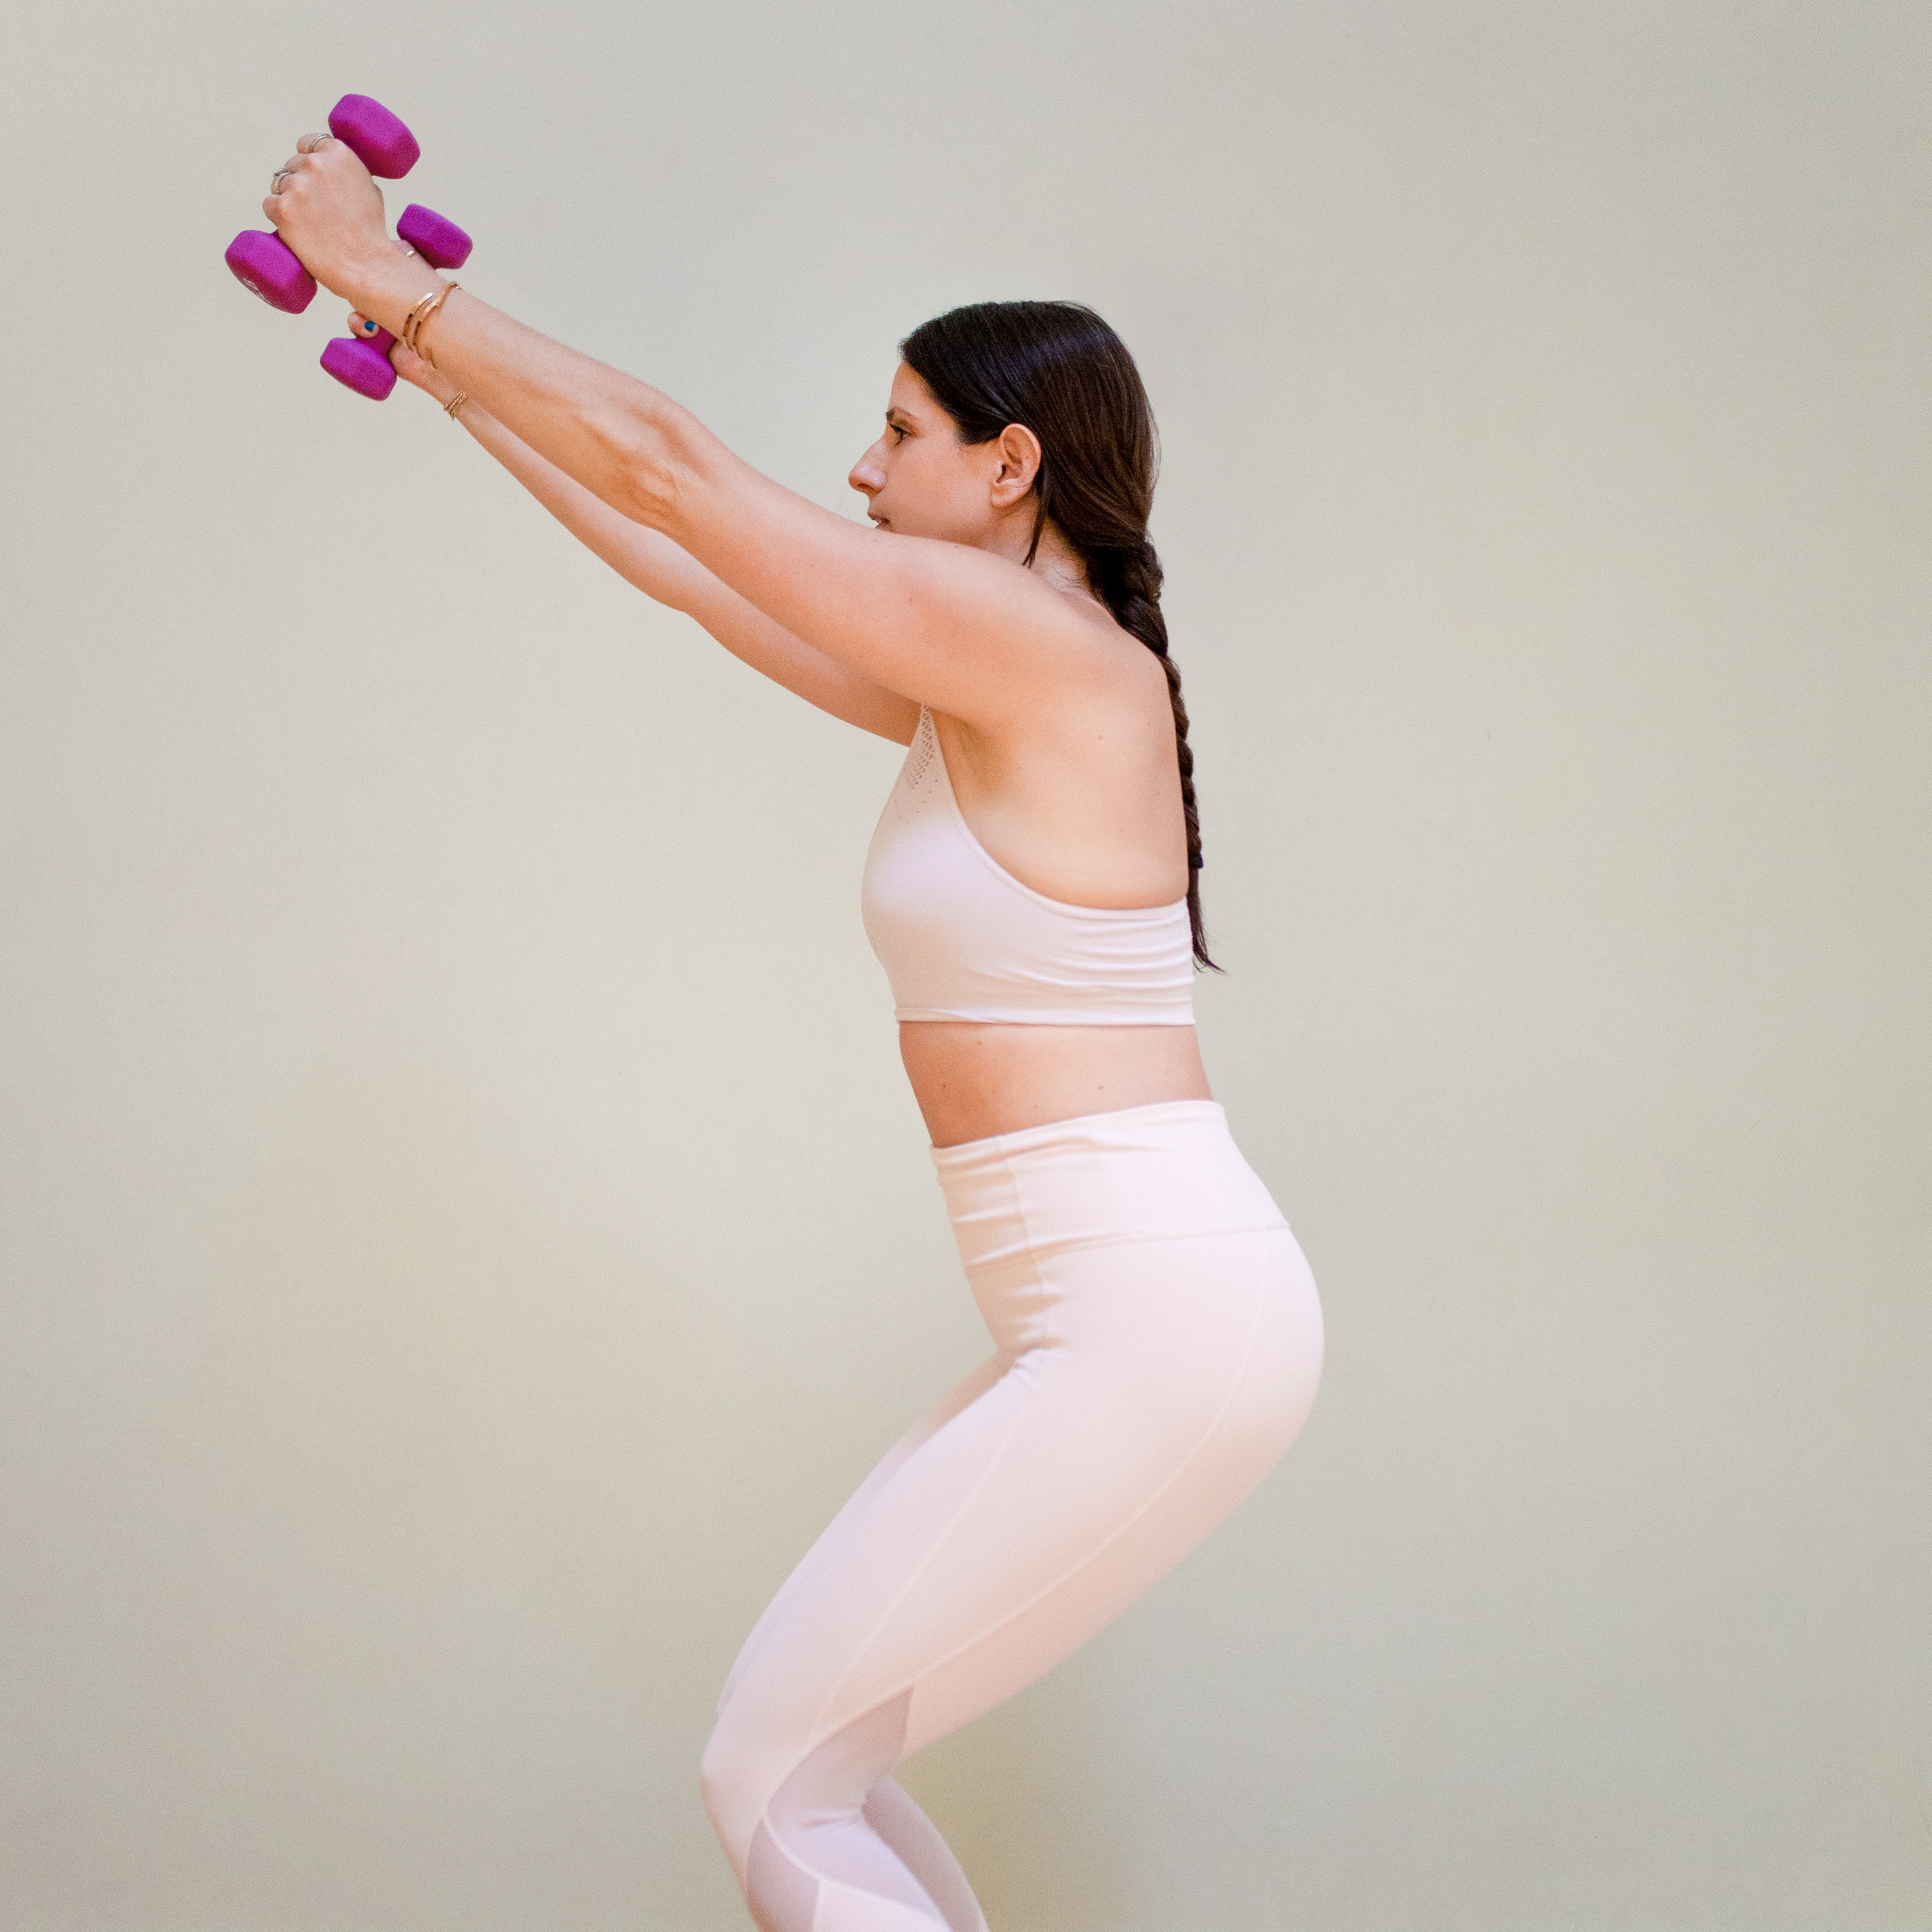 5 Ways to Incorporate Free Weights into Your Yoga Practice